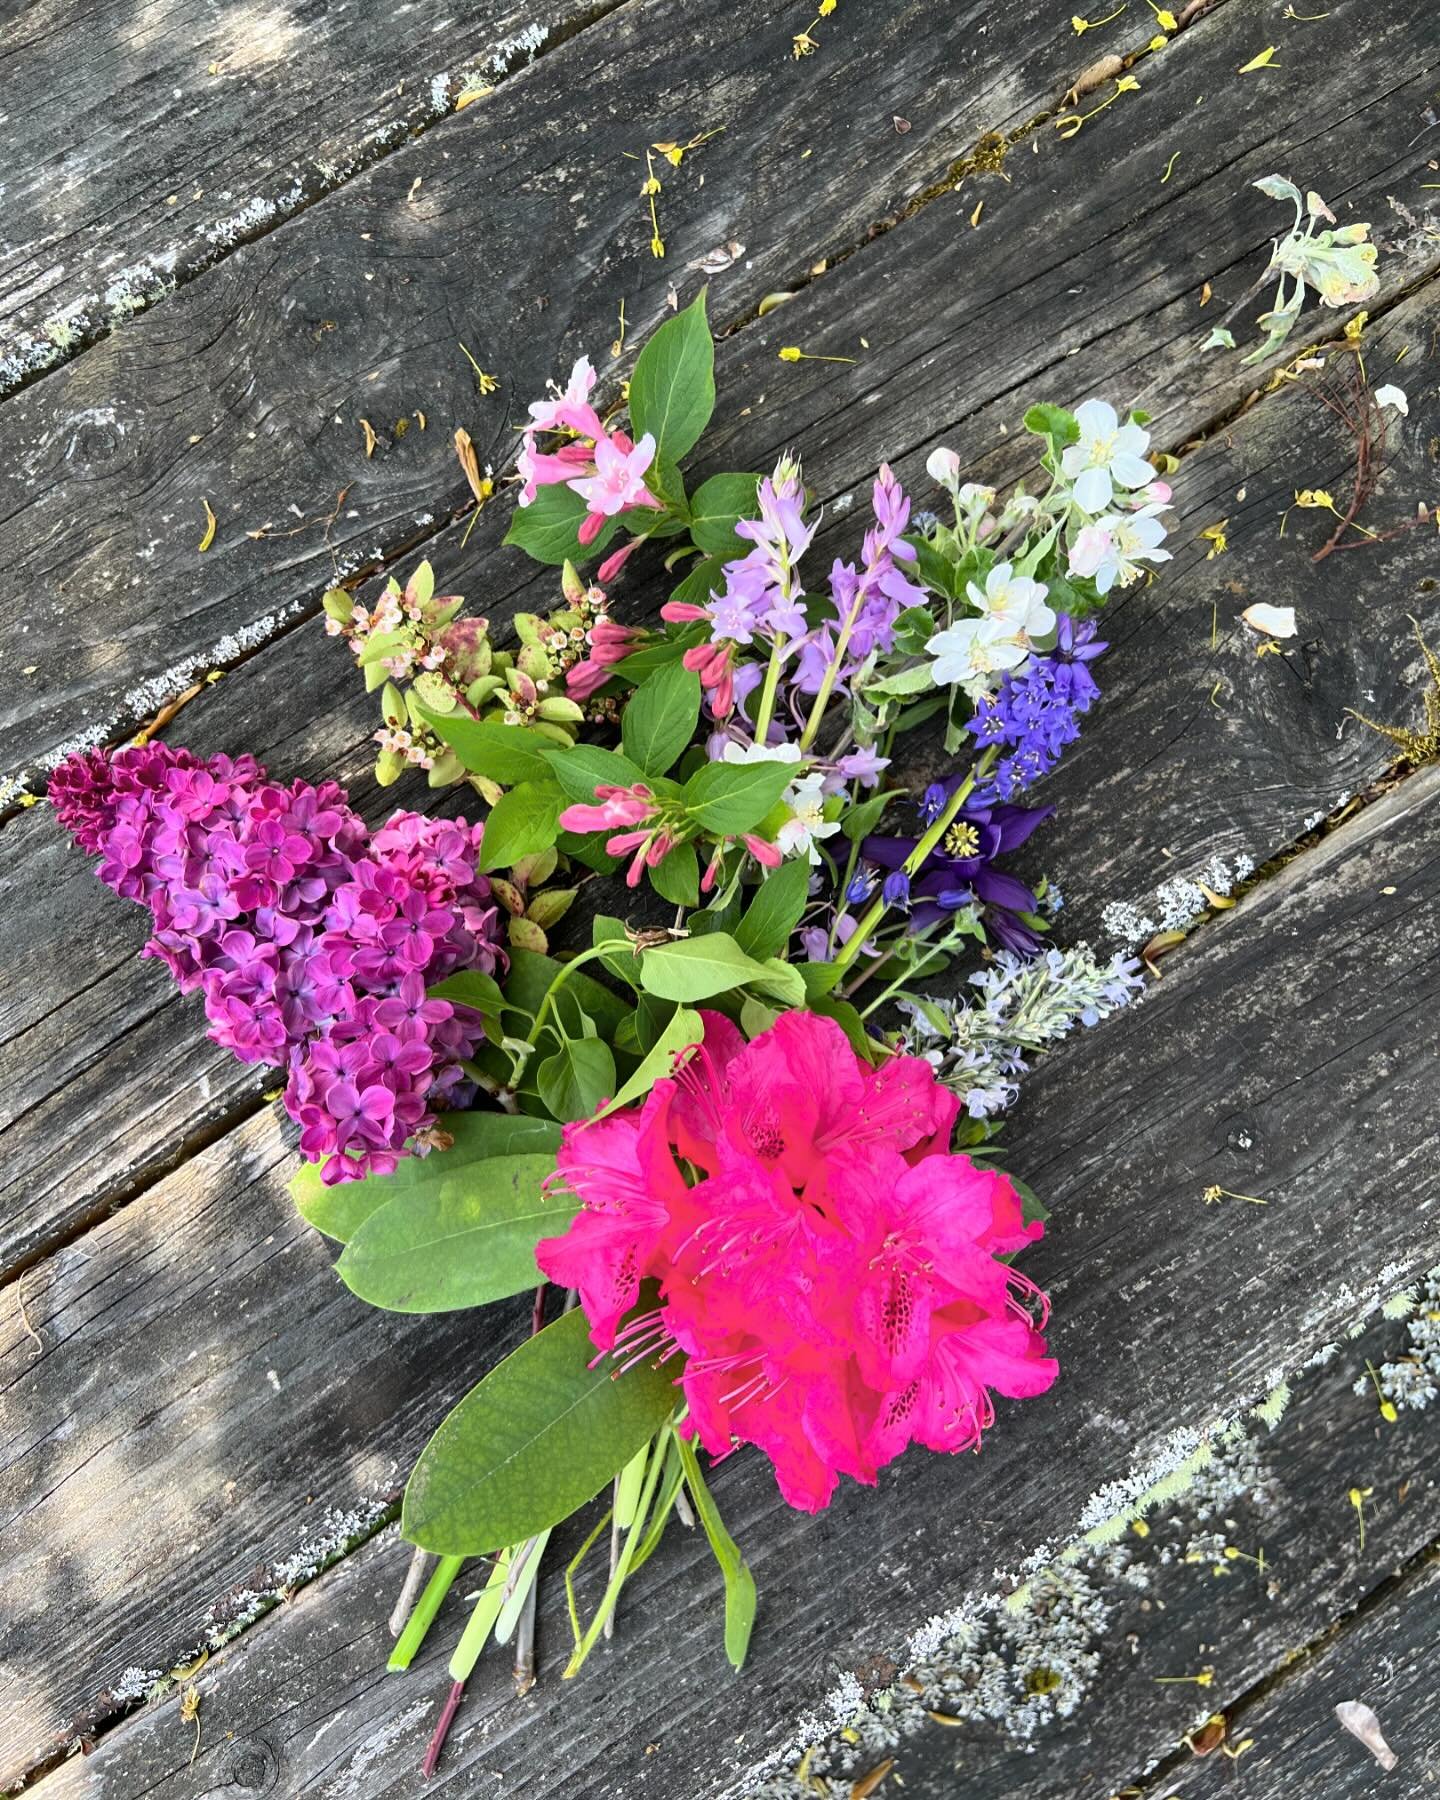 Happy May Day from the columbine and apple blossoms, the forget-me-nots, bluebells, lilac and huckleberry, from the rhododendron, weigela, and rosemary. They&rsquo;re singing with color and scent and humming with bees. Each year I bring in a sample o